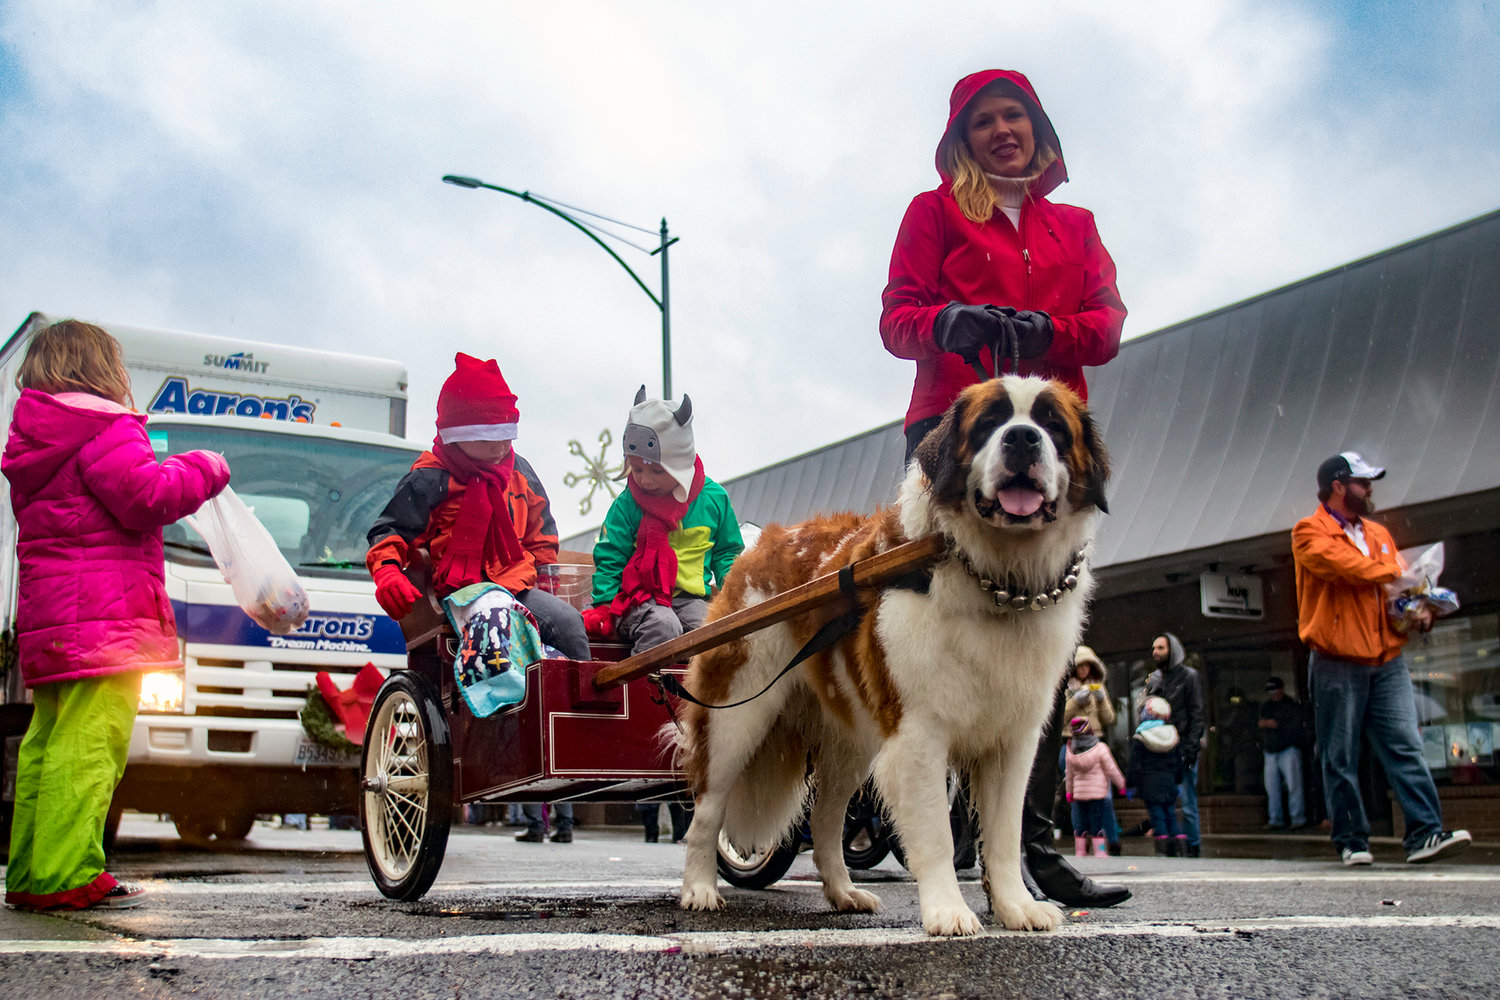 A girl swings her bag of candy as a dog pulls two children in a carriage during the annual Santa Parade last year in downtown Chehalis.